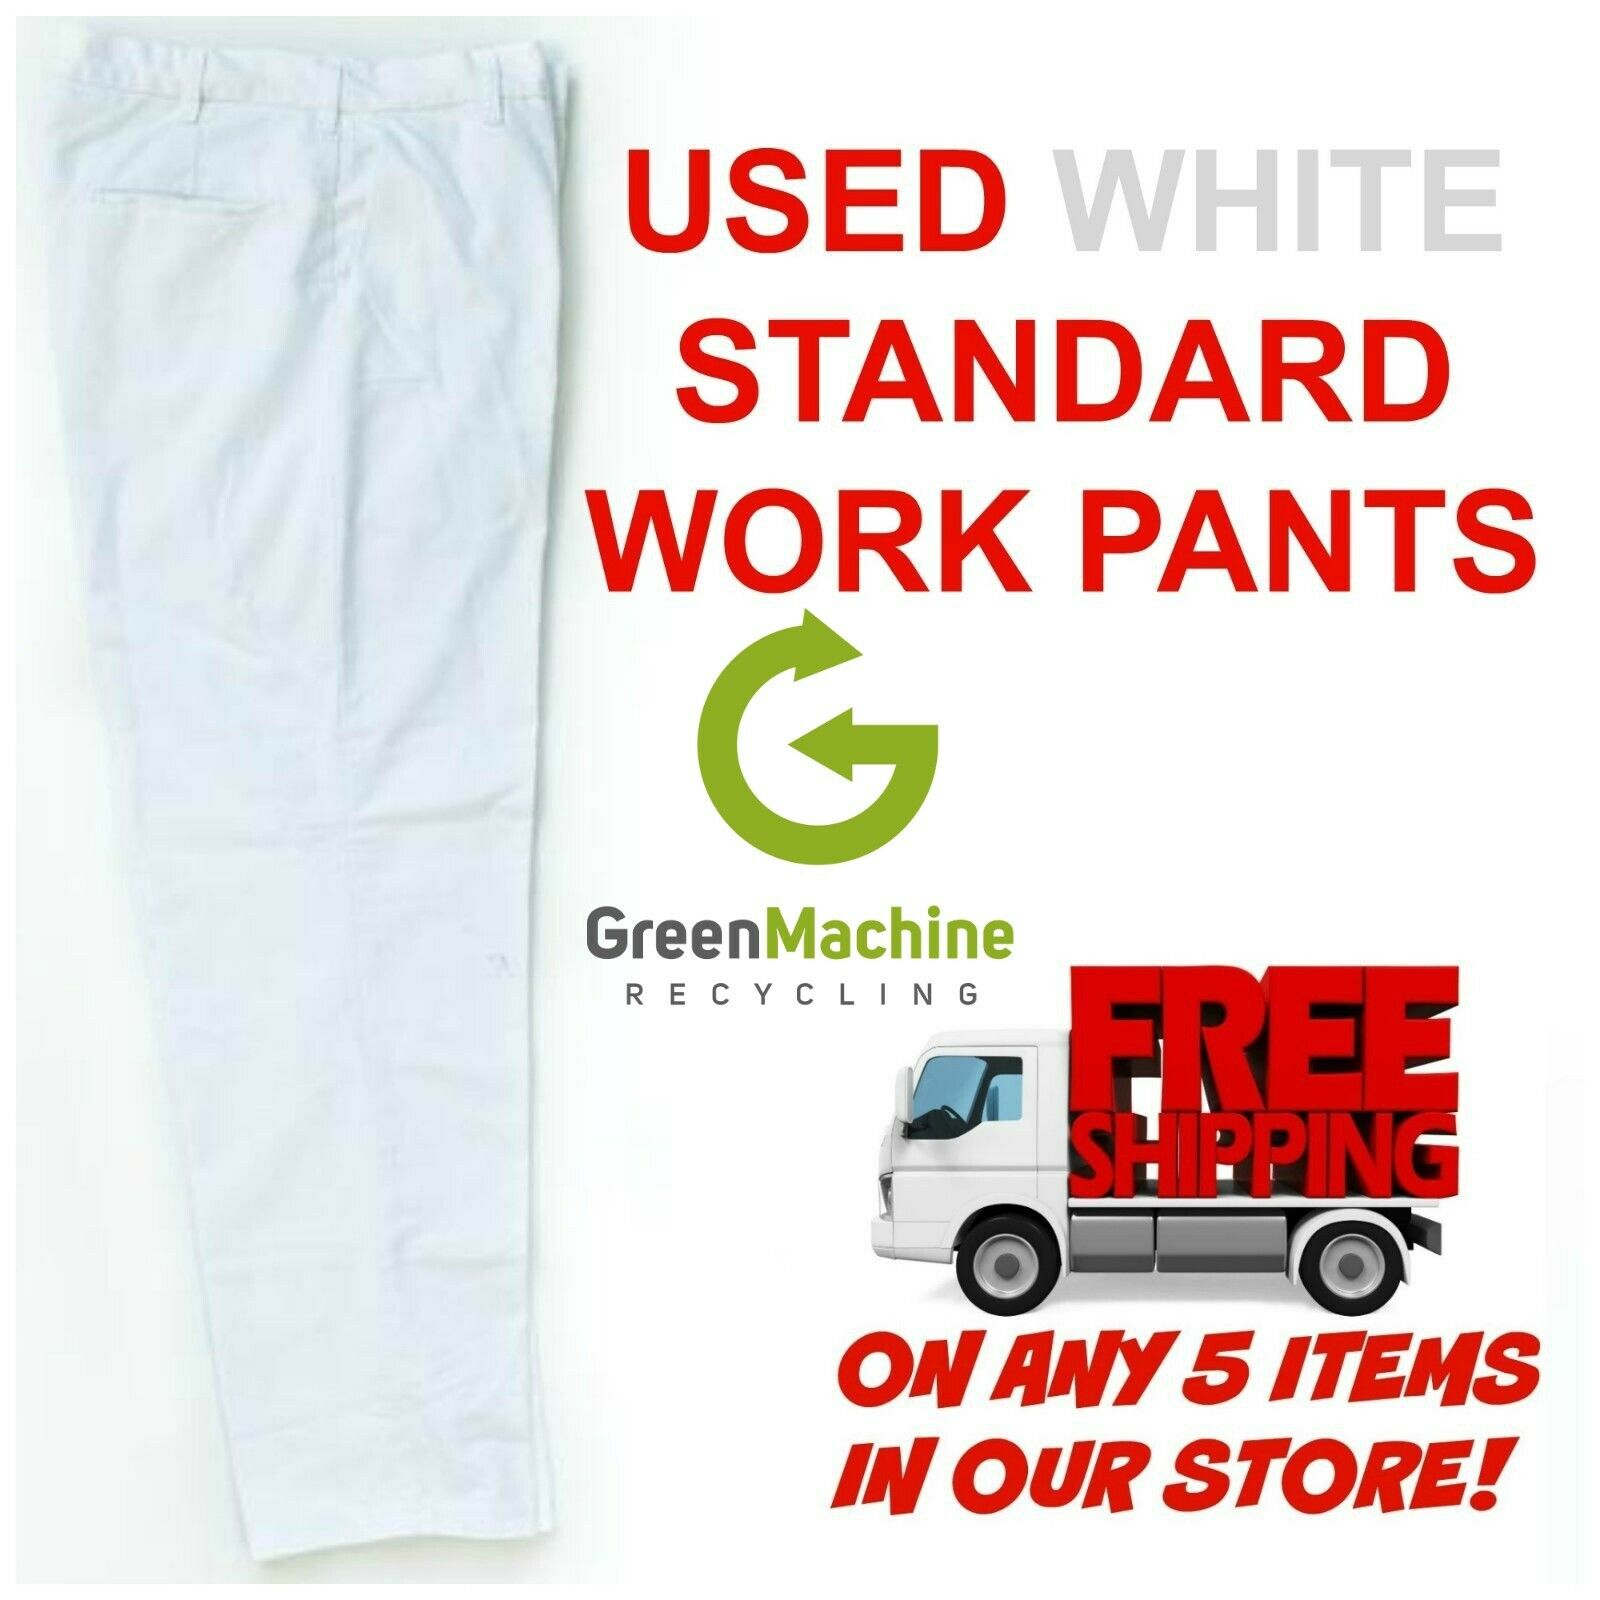 Used Uniform Work Painter Pants Cintas Redkap Unifirst G&k Dickies And Others